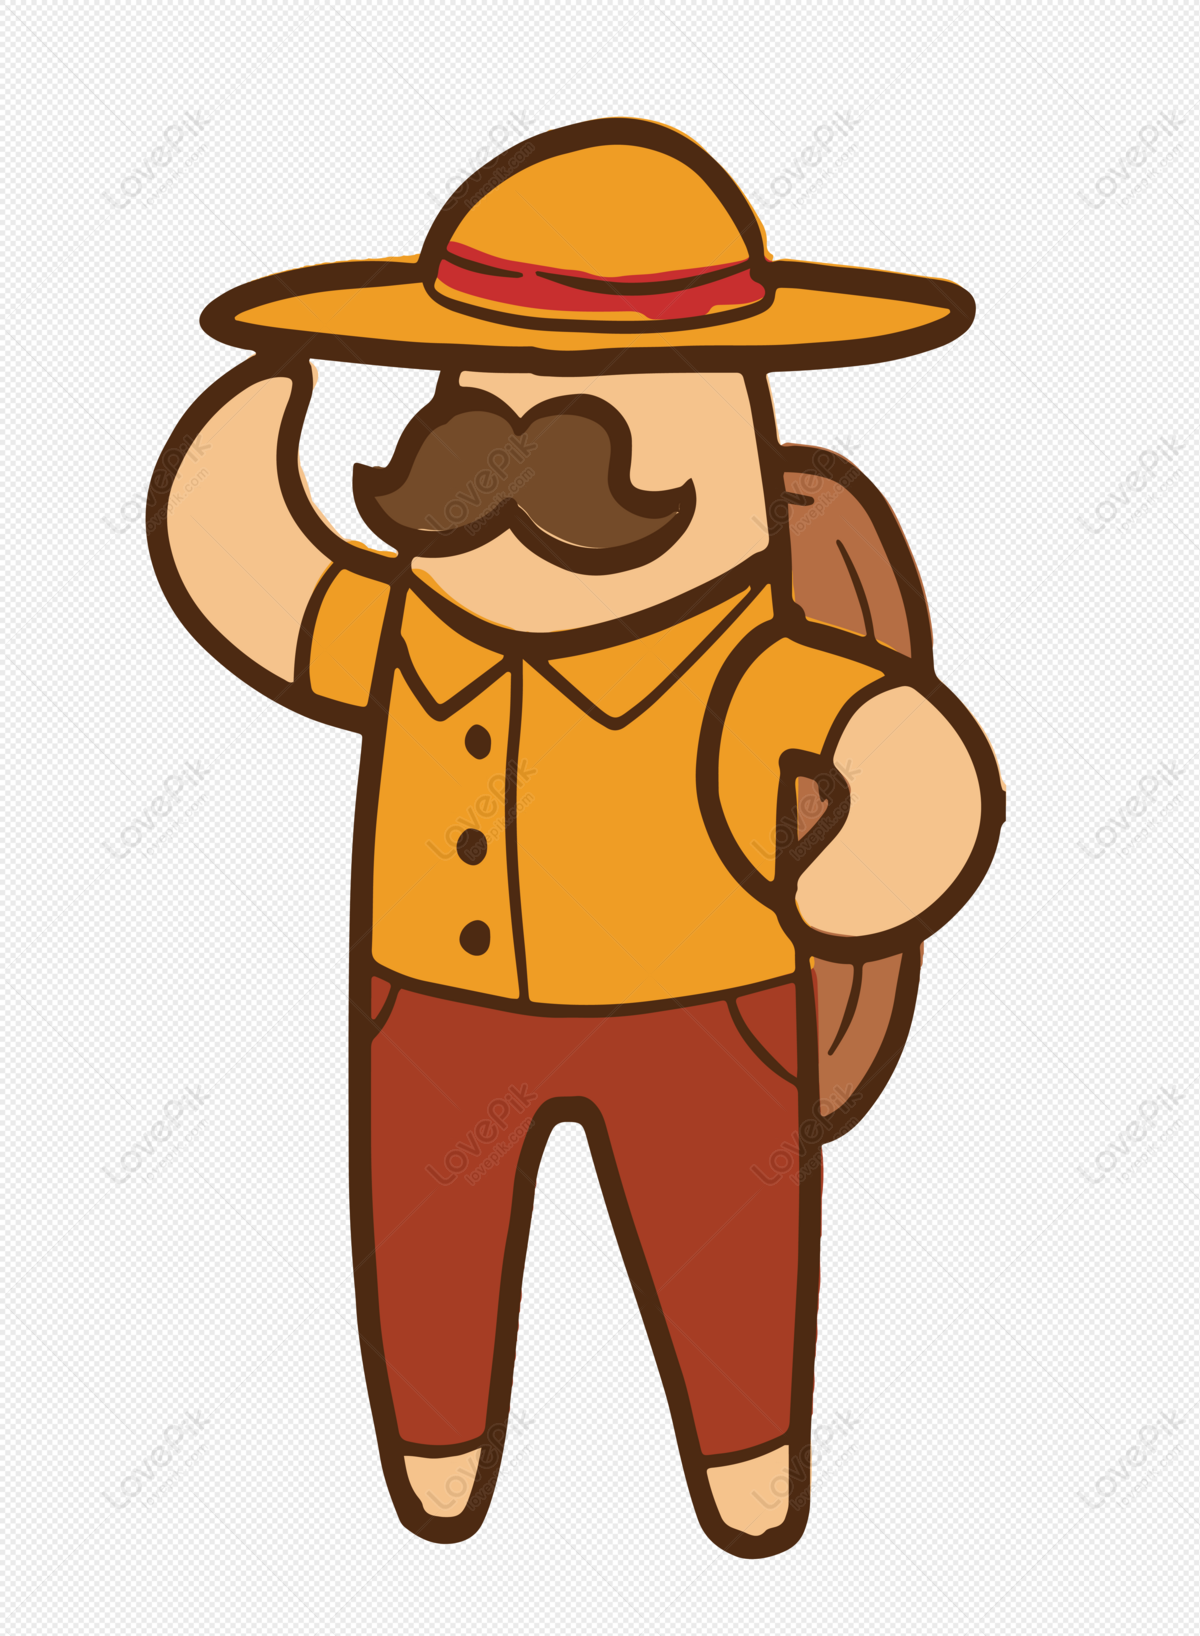 Uncle Cartoon PNG Image Free Download And Clipart Image For Free Download -  Lovepik | 400218031